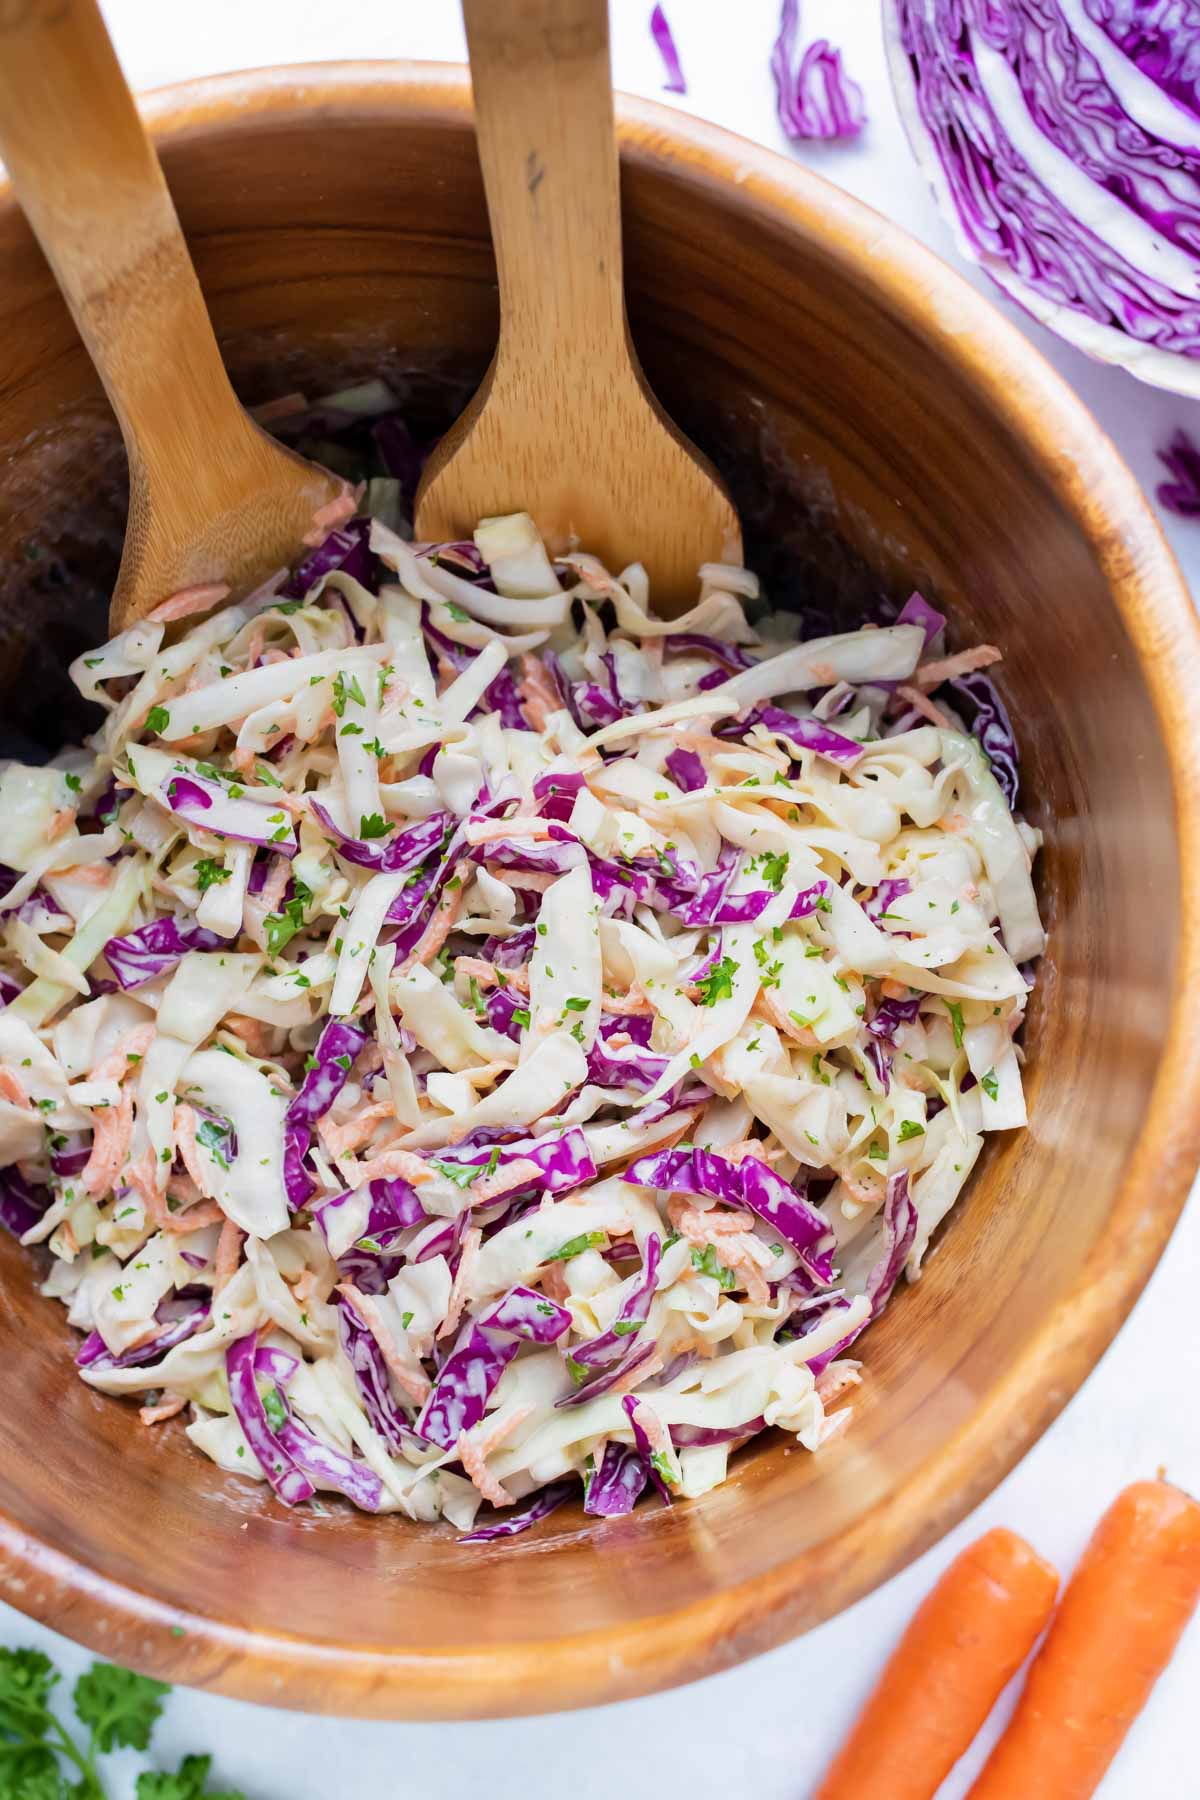 A wooden bowl full of a southern coleslaw recipe.